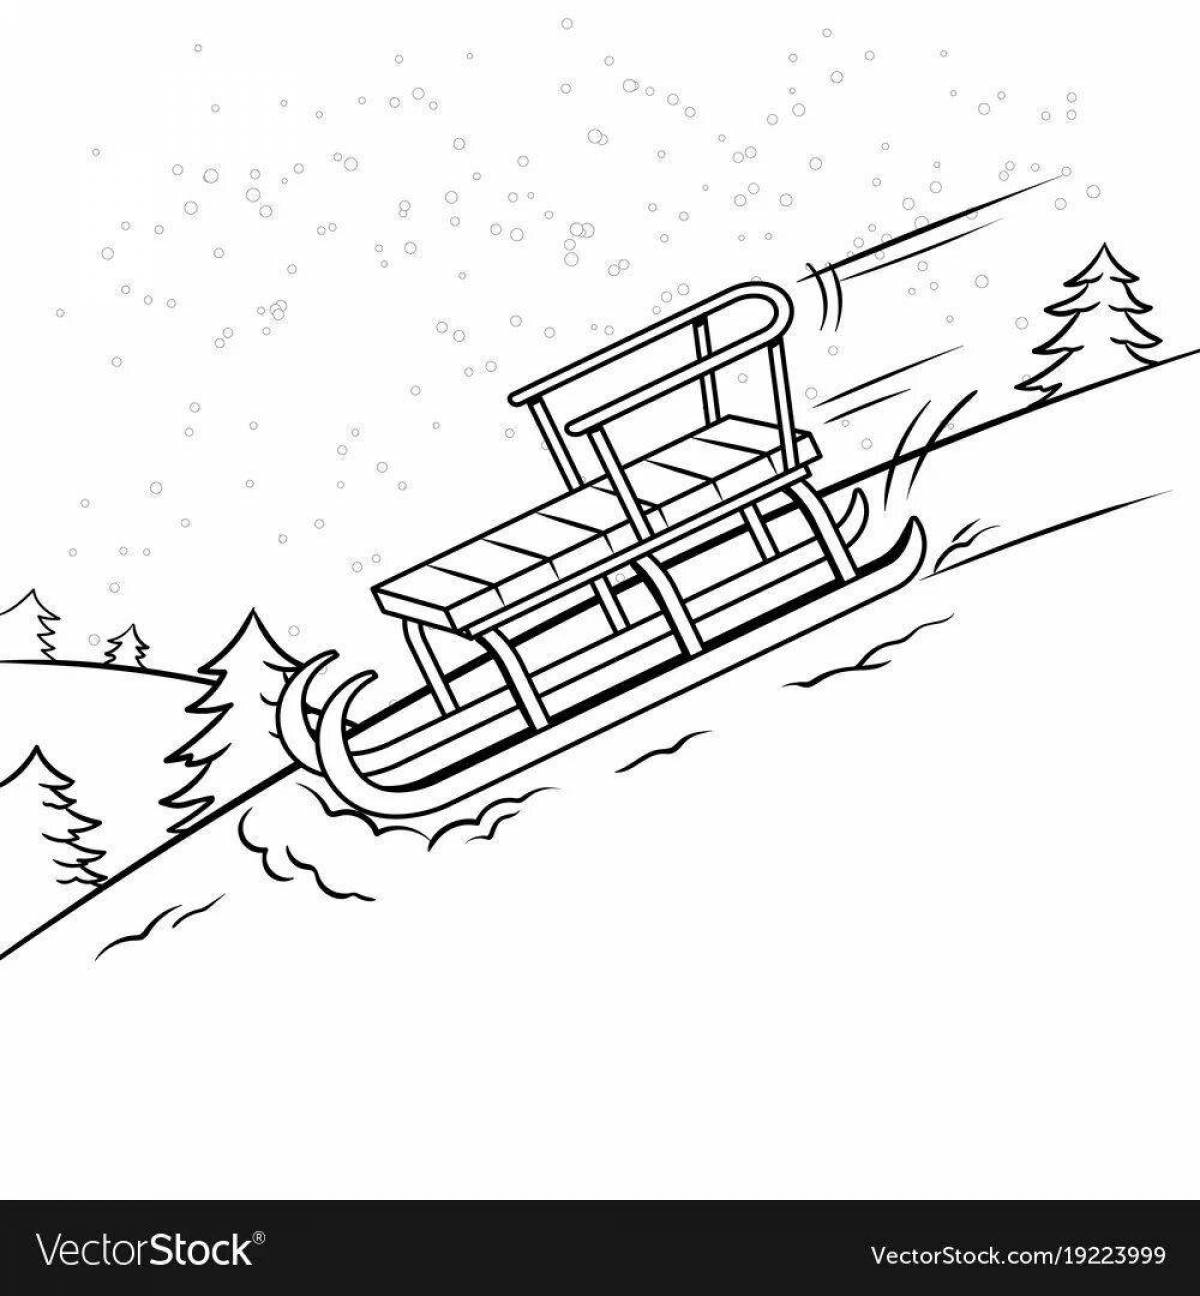 Shiny sleigh coloring for kids